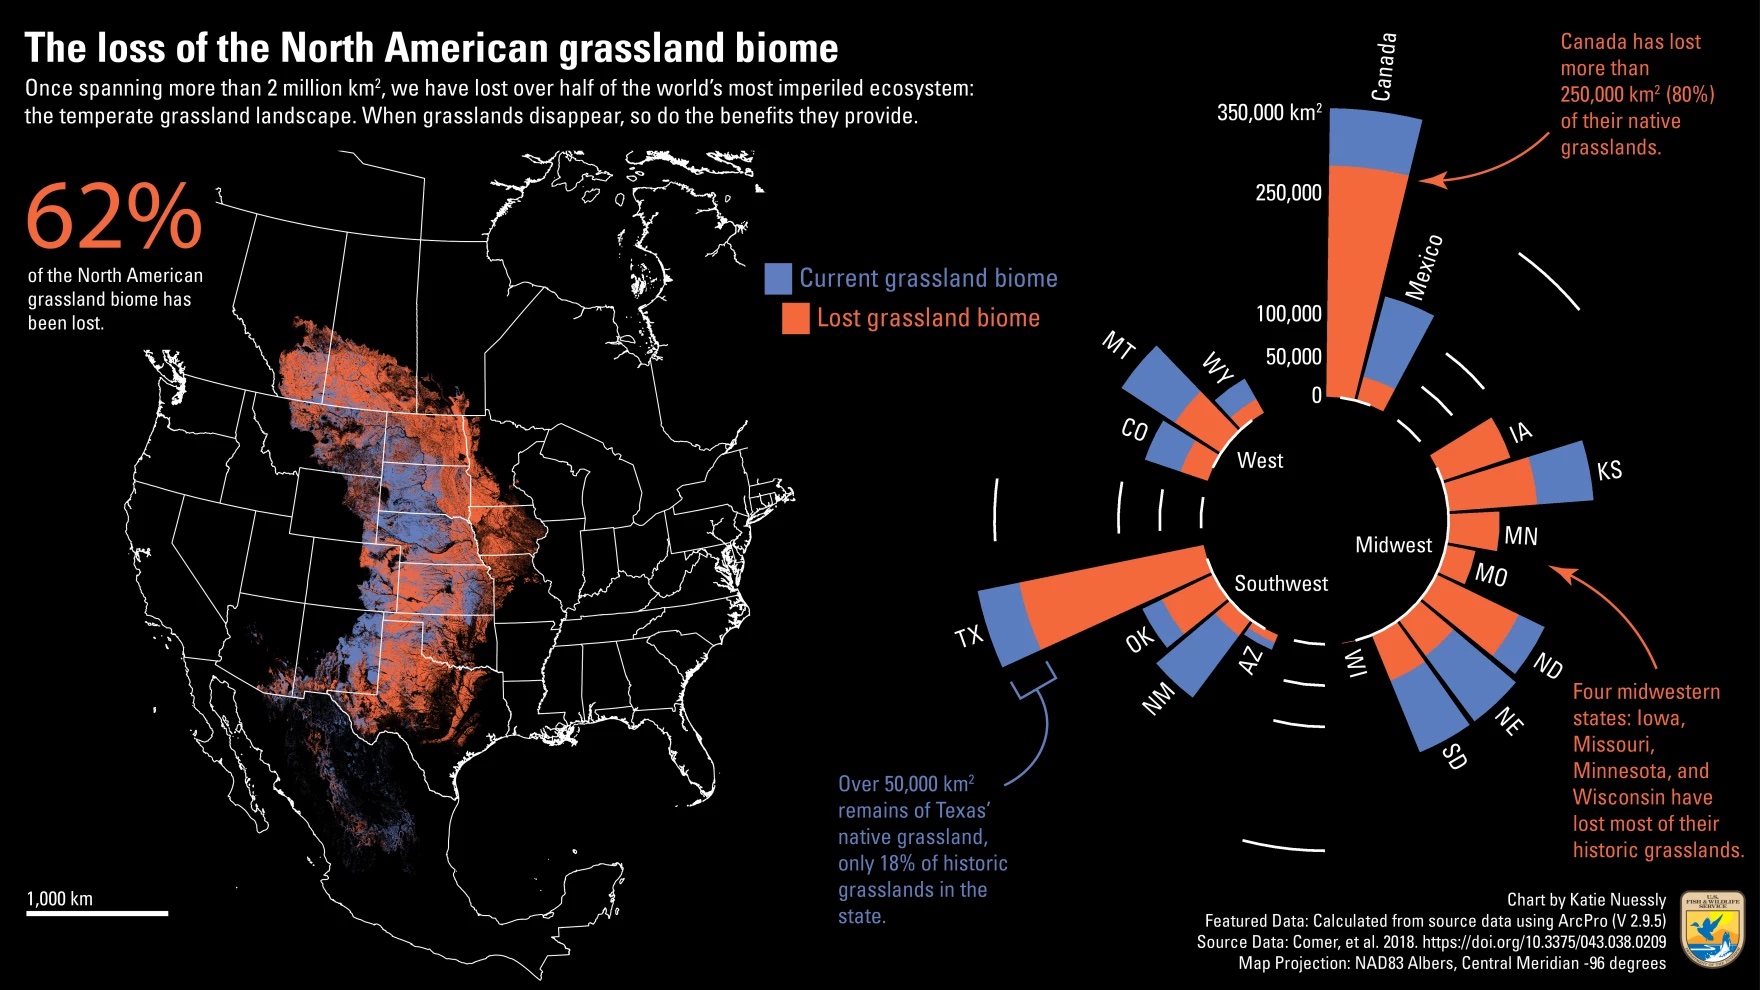 A map of the US showing 62% of the North American grassland biome has been lost. On the right, a circular bar graph shows how much grassland loss is occurring in different Great Plains areas. Canada has lost more than 250,000 square km of their native grassland, a massive amount compared to the other places.